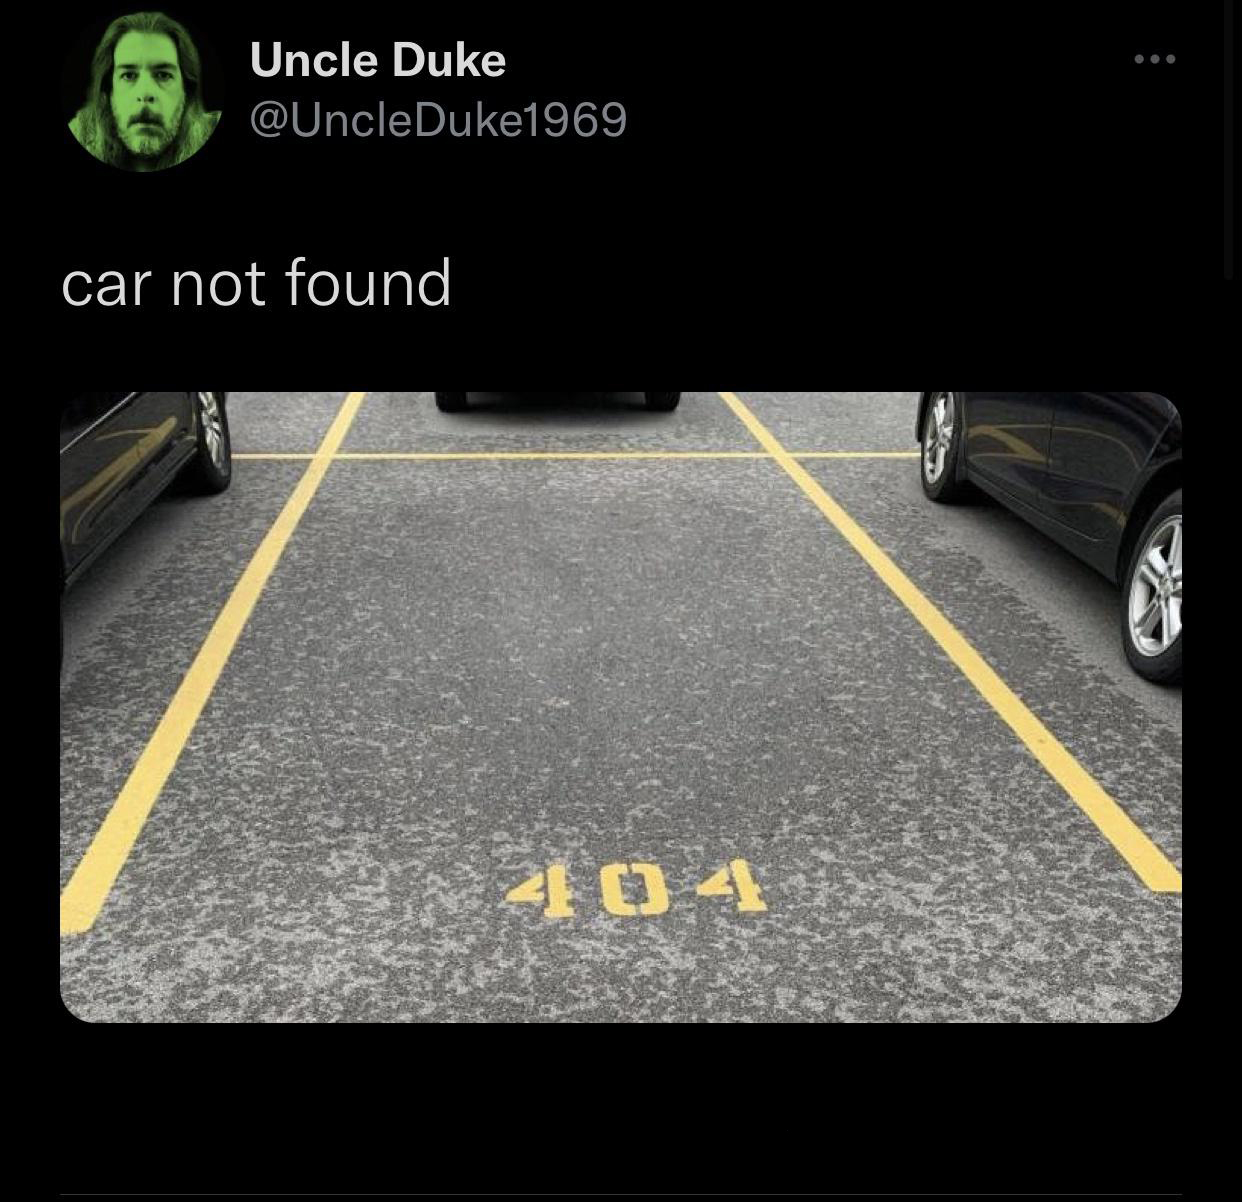 funny tweets - hot takes - car - Uncle Duke car not found 2104